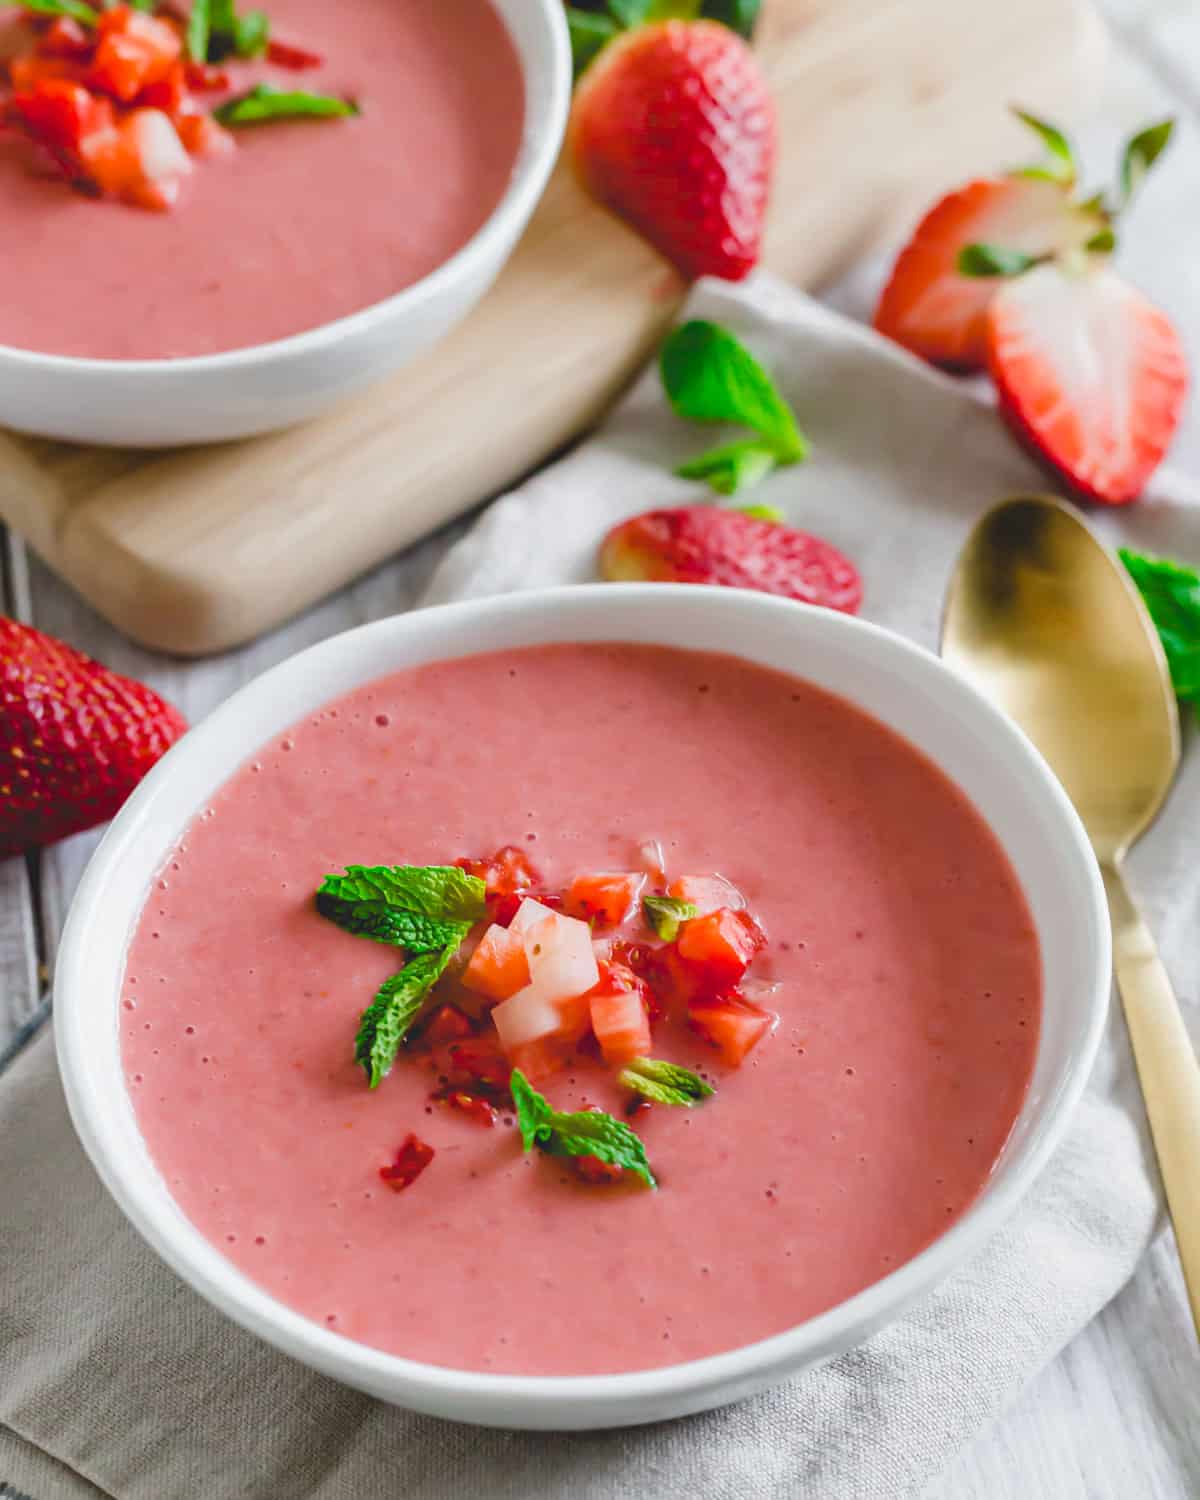 Cold strawberry soup in a white bowl.